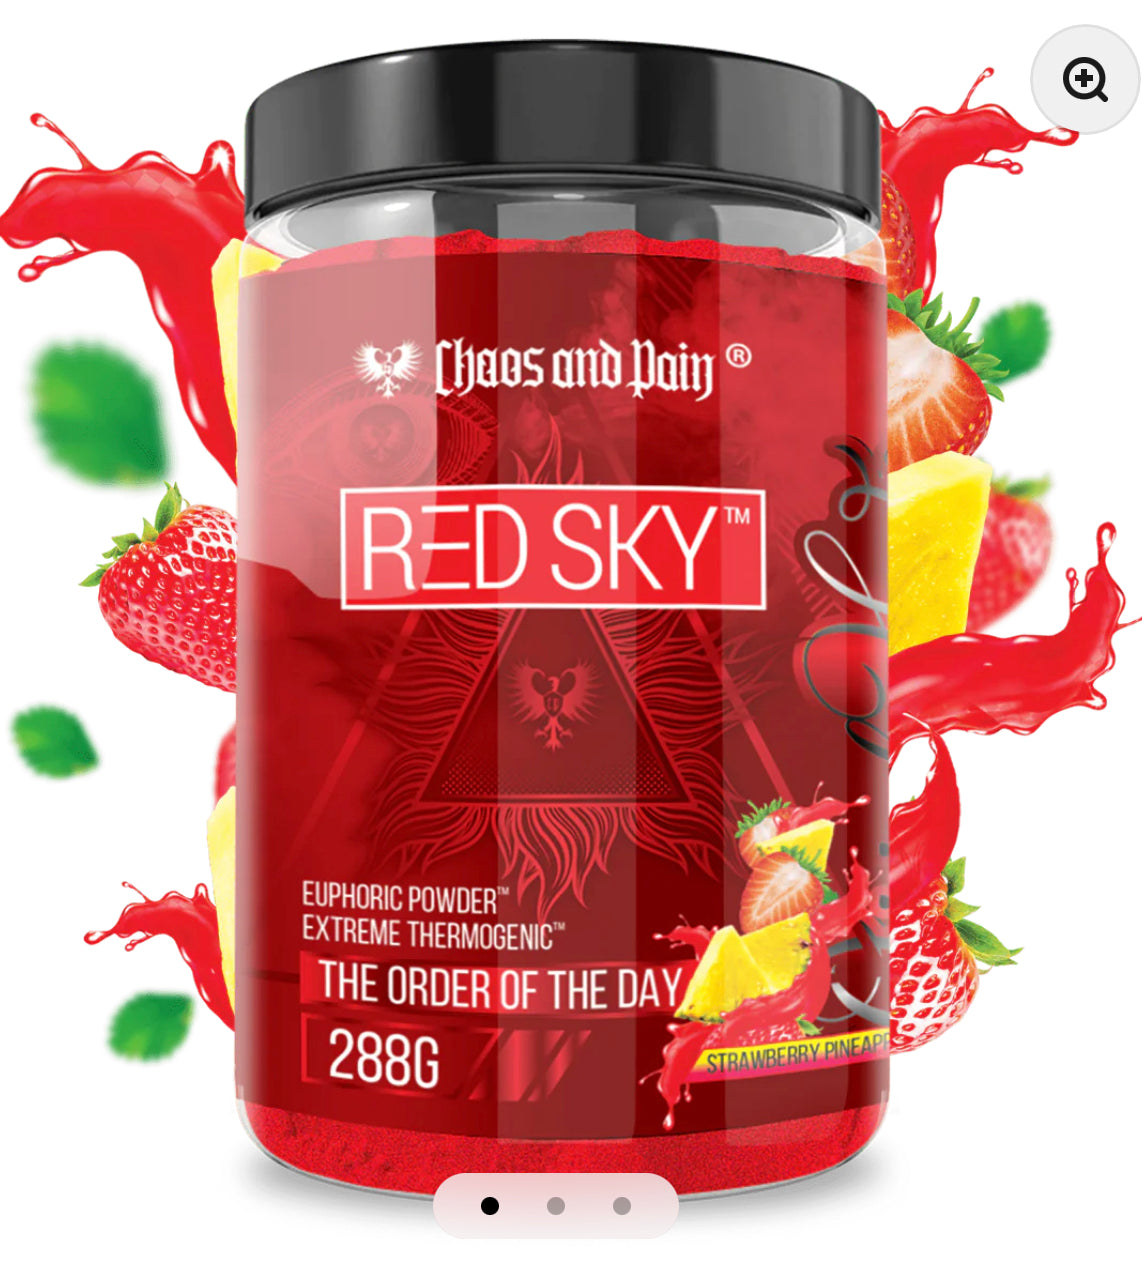 RED SKY POWDER - EXTREME THERMOGENIC